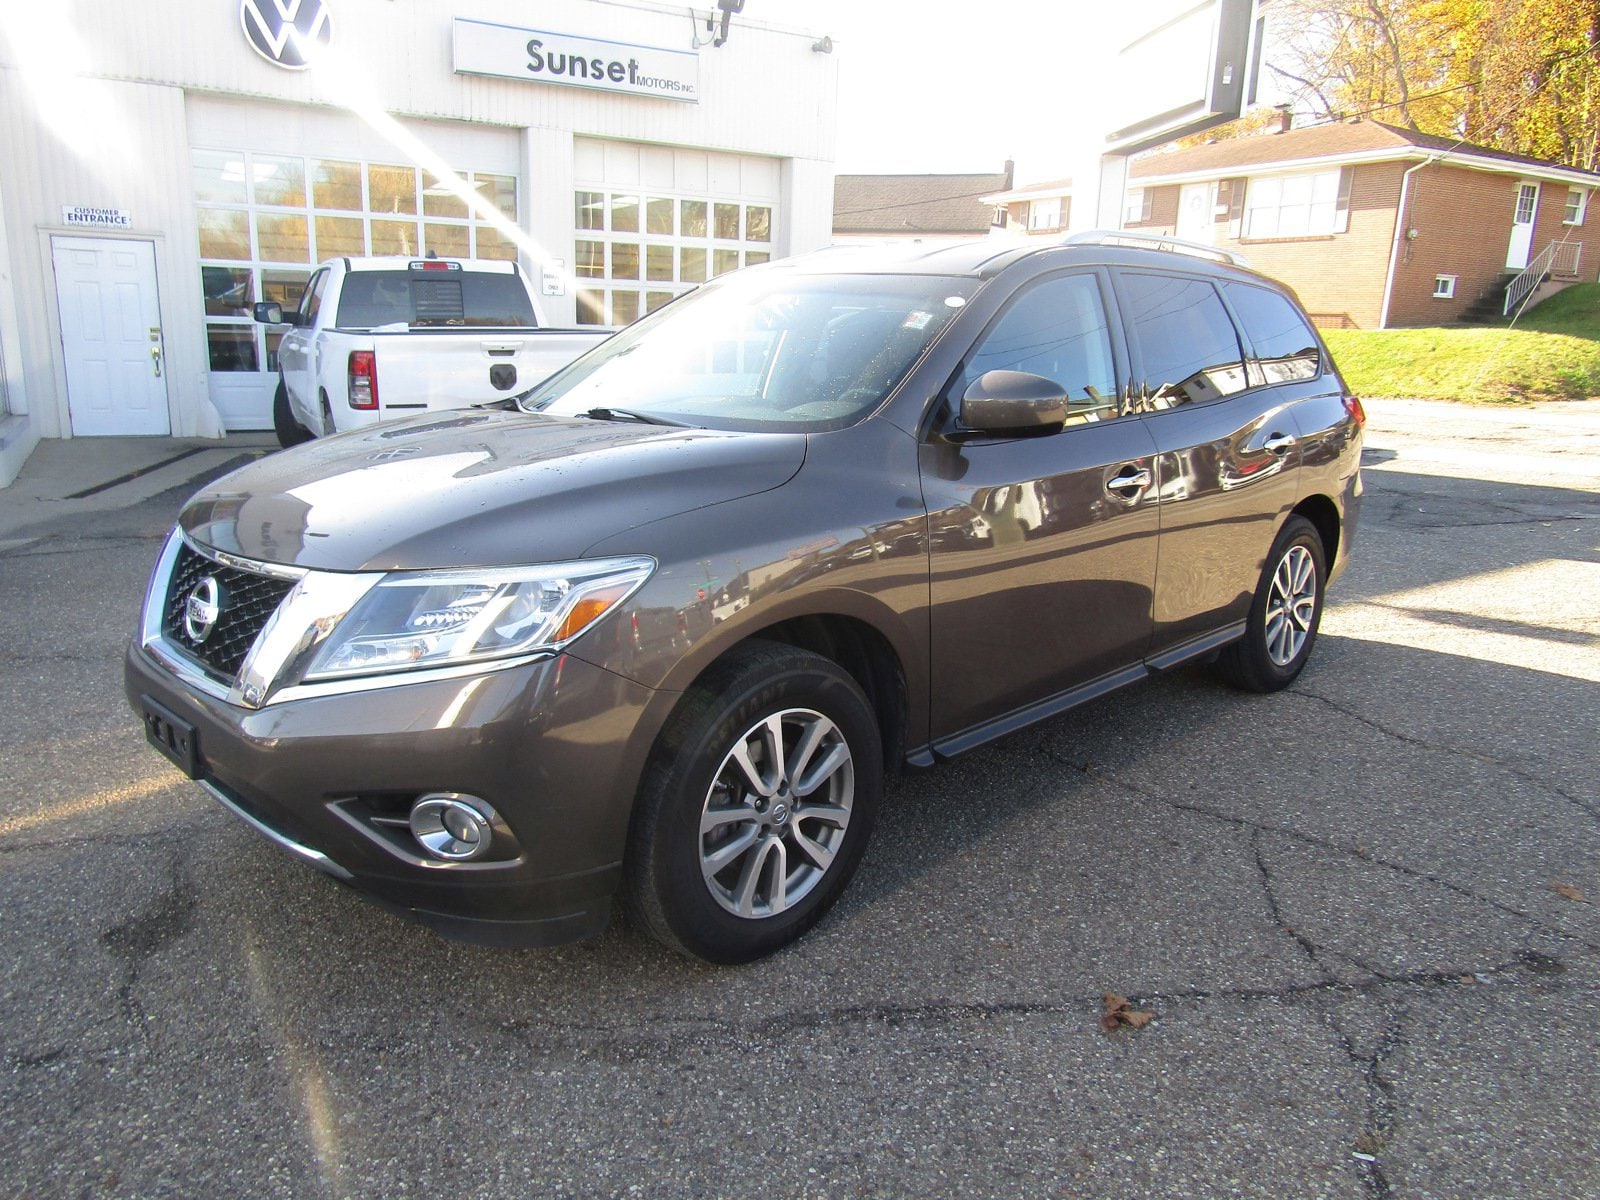 Used 2016 Nissan Pathfinder SV with VIN 5N1AR2MM5GC641927 for sale in Steubenville, OH